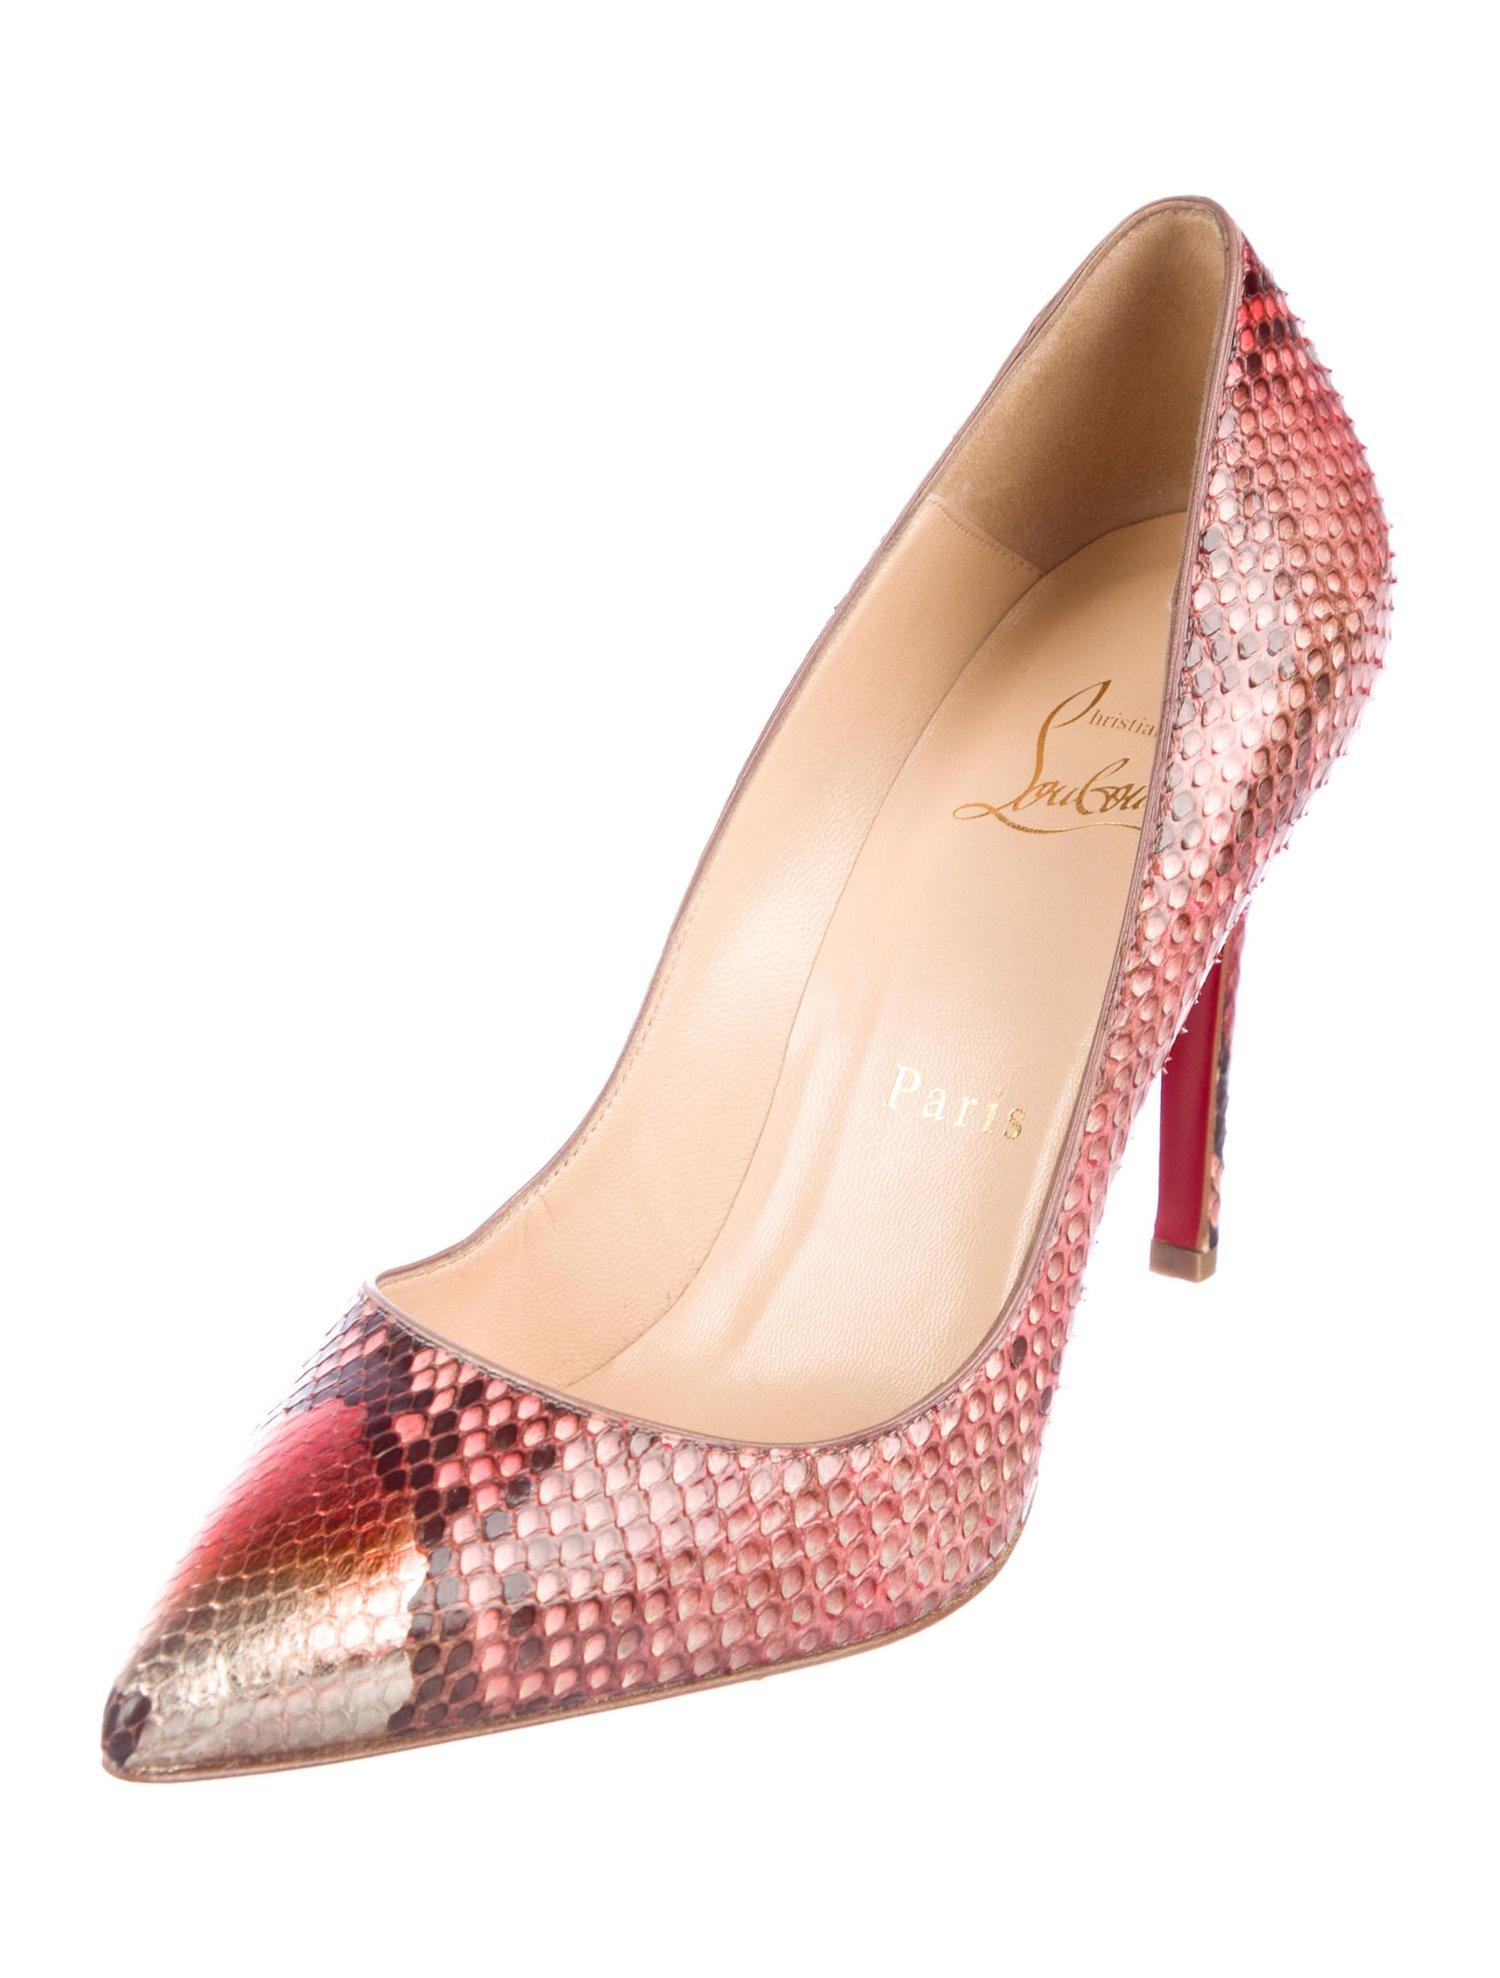 Christian Louboutin NEW Pink Red Black Snakeskin Evening Pumps Heels

Size IT 36
Snakeskin
Slide on
Made in Italy
Heel height 4.25